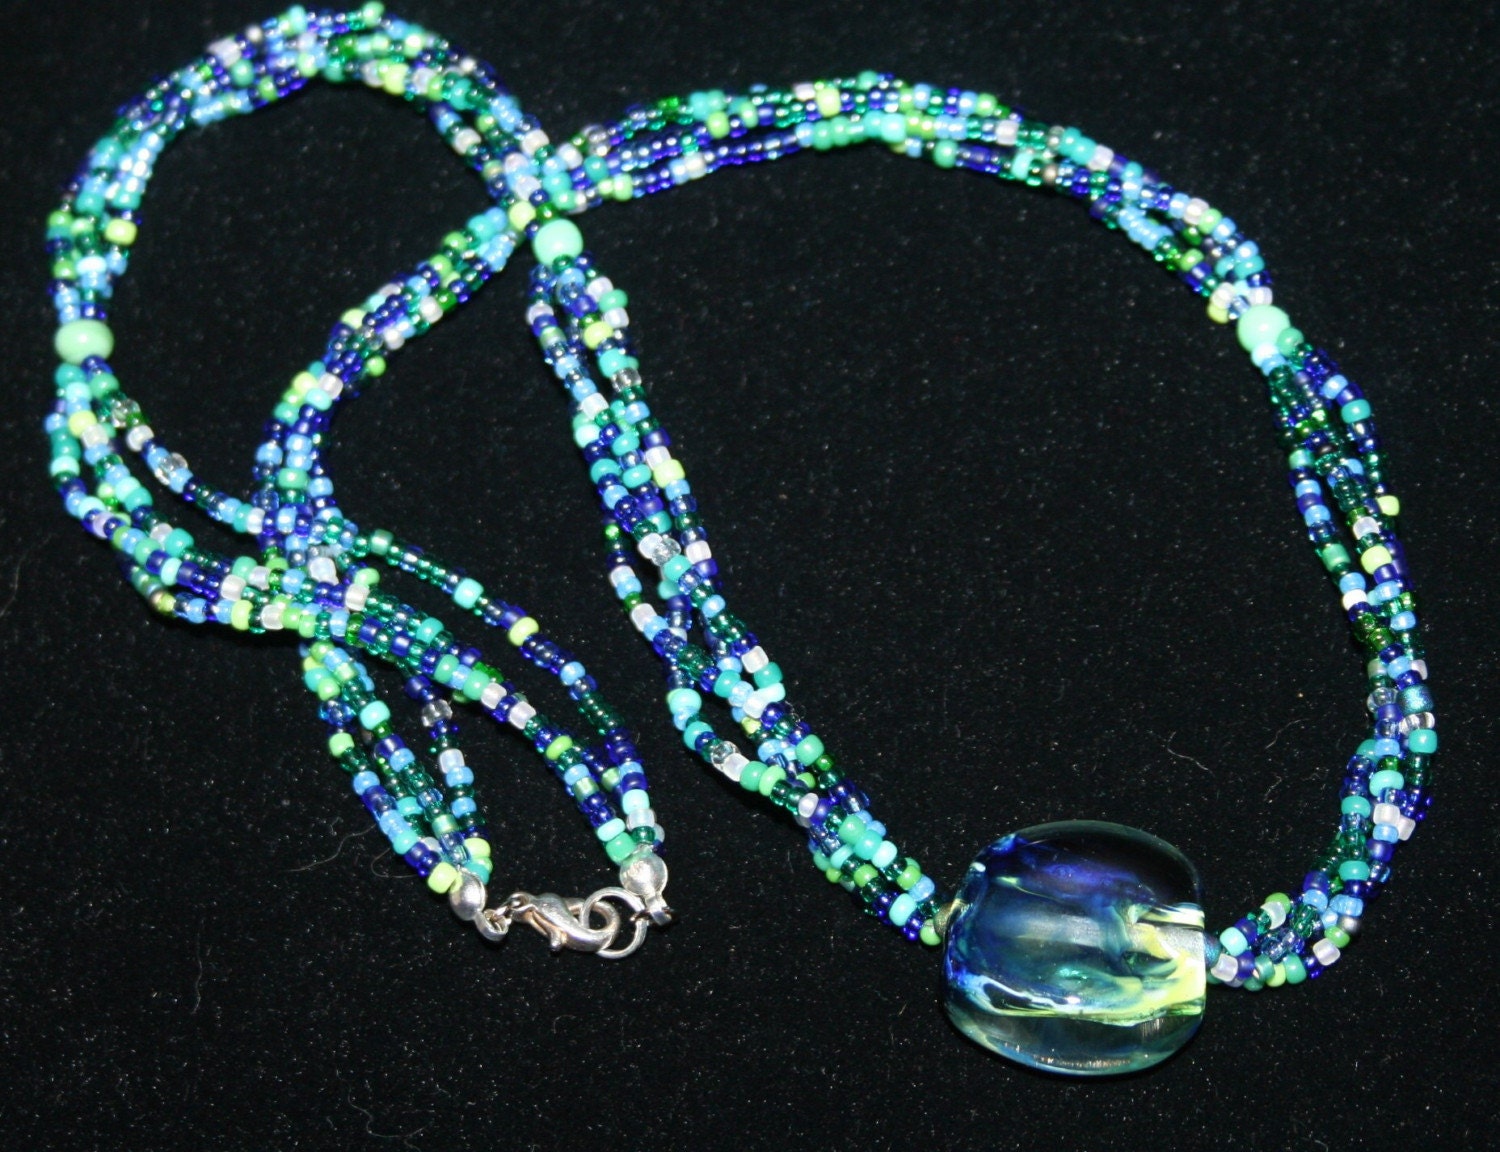 Coco Bleu Lampwork and Seed Bead Necklace